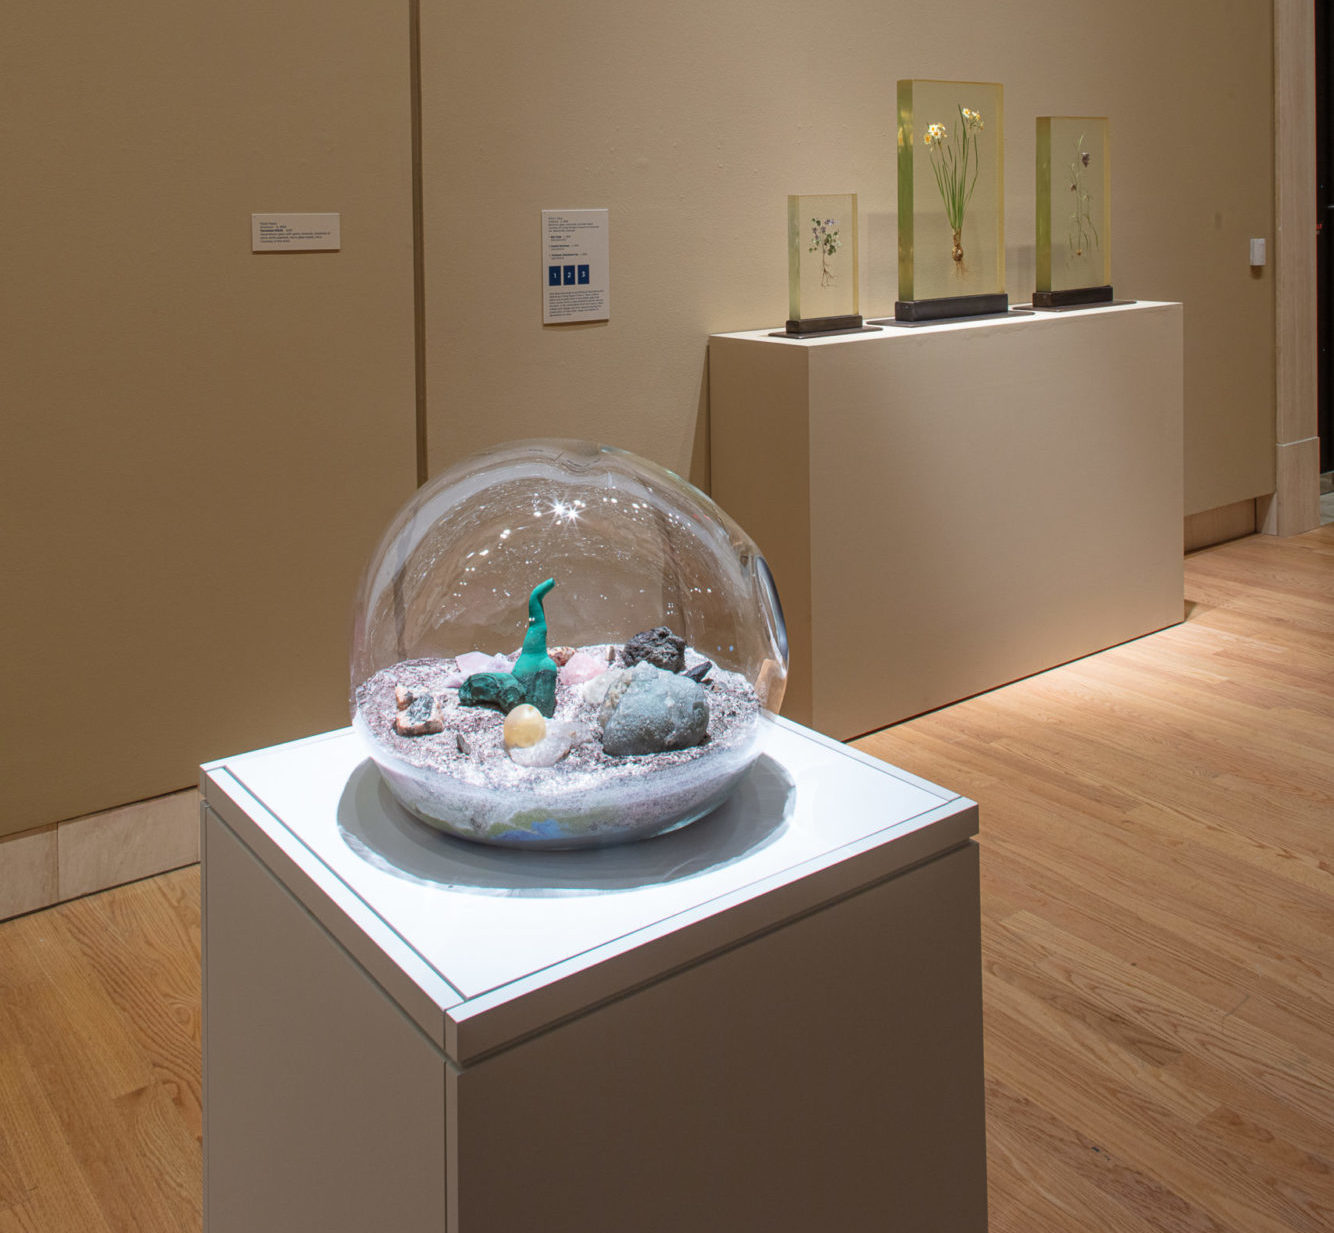 Installation view of podium holding a glass bubble encasing a small amount of sand and rocks. It includes small statues inside it as well.